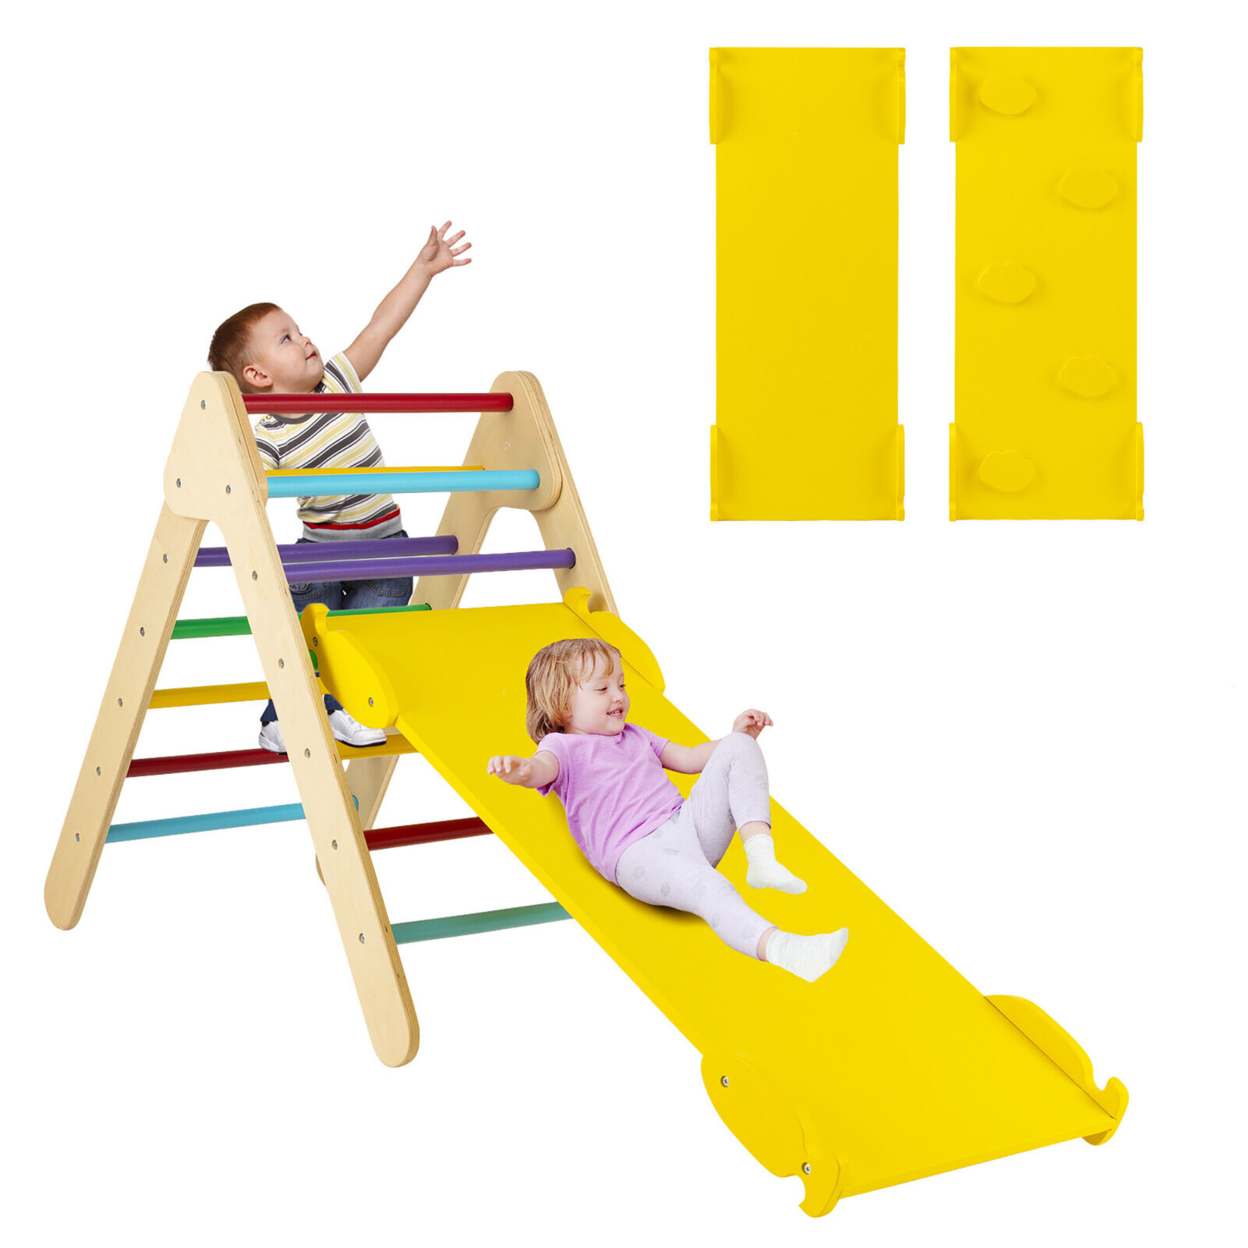 3-in-1 Wooden Climbing Triangle Set Triangle Climber W/ Ramp - Multi-color